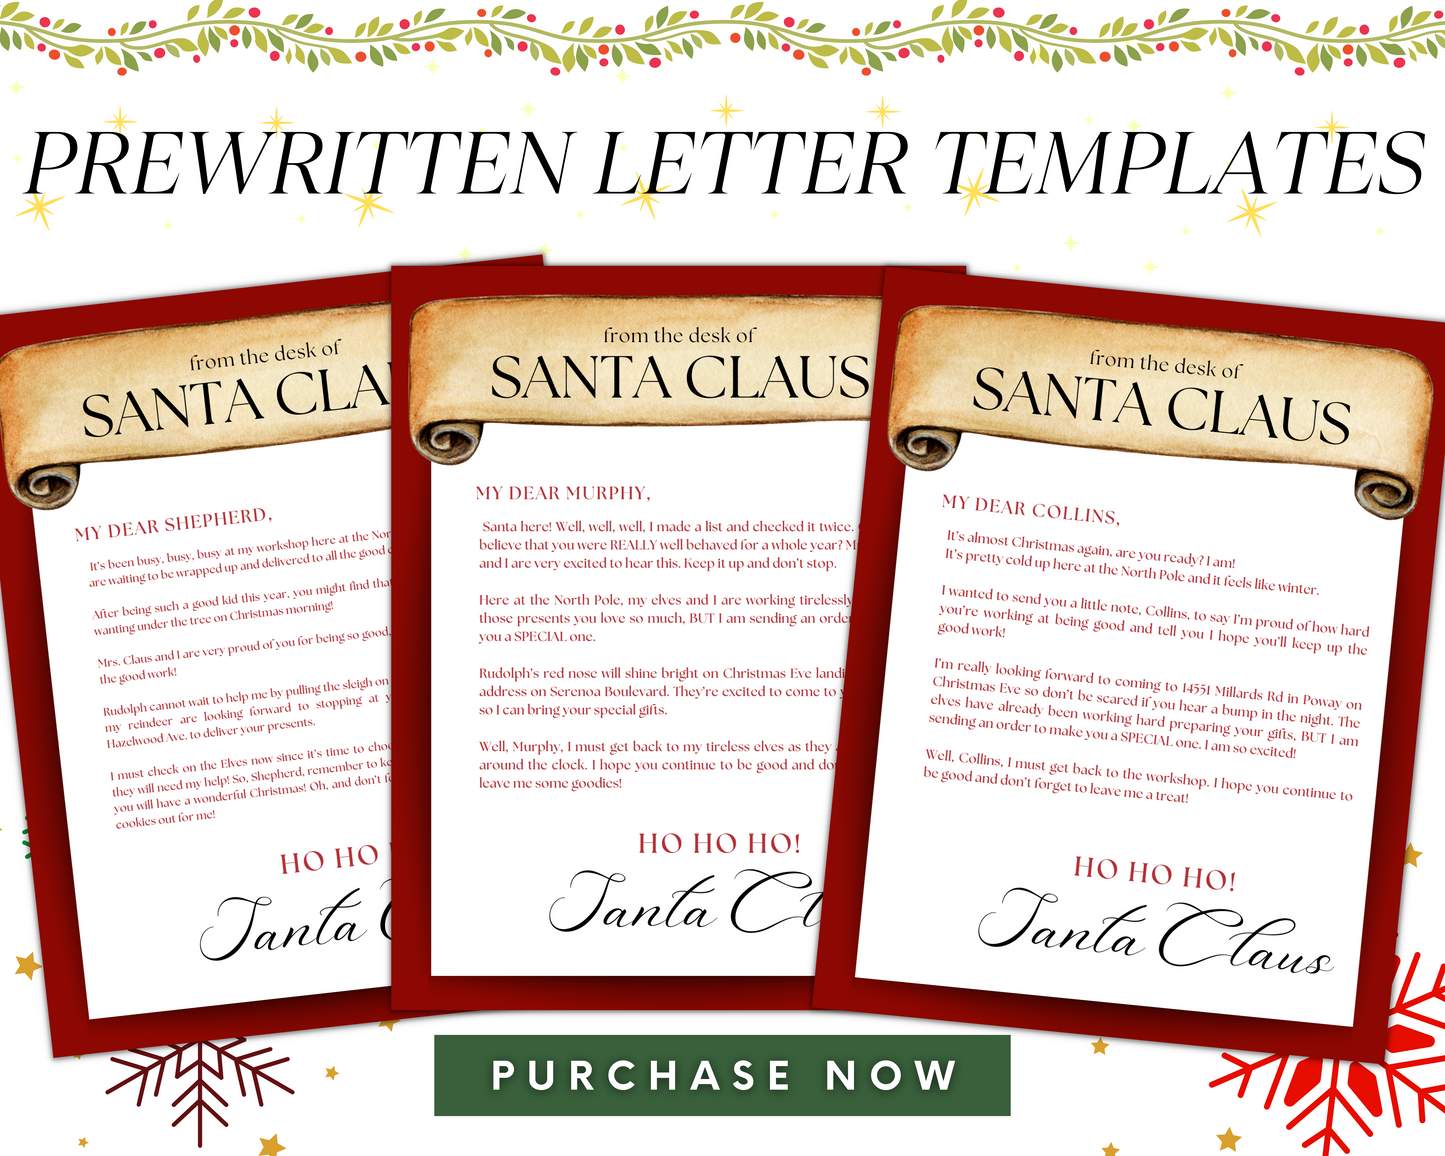 Letters To Santa, Santa Letters, Christmas Real Estate, Real Estate Client Event, Real Estate Marketing, Real Estate Pop By, Realtor Letter